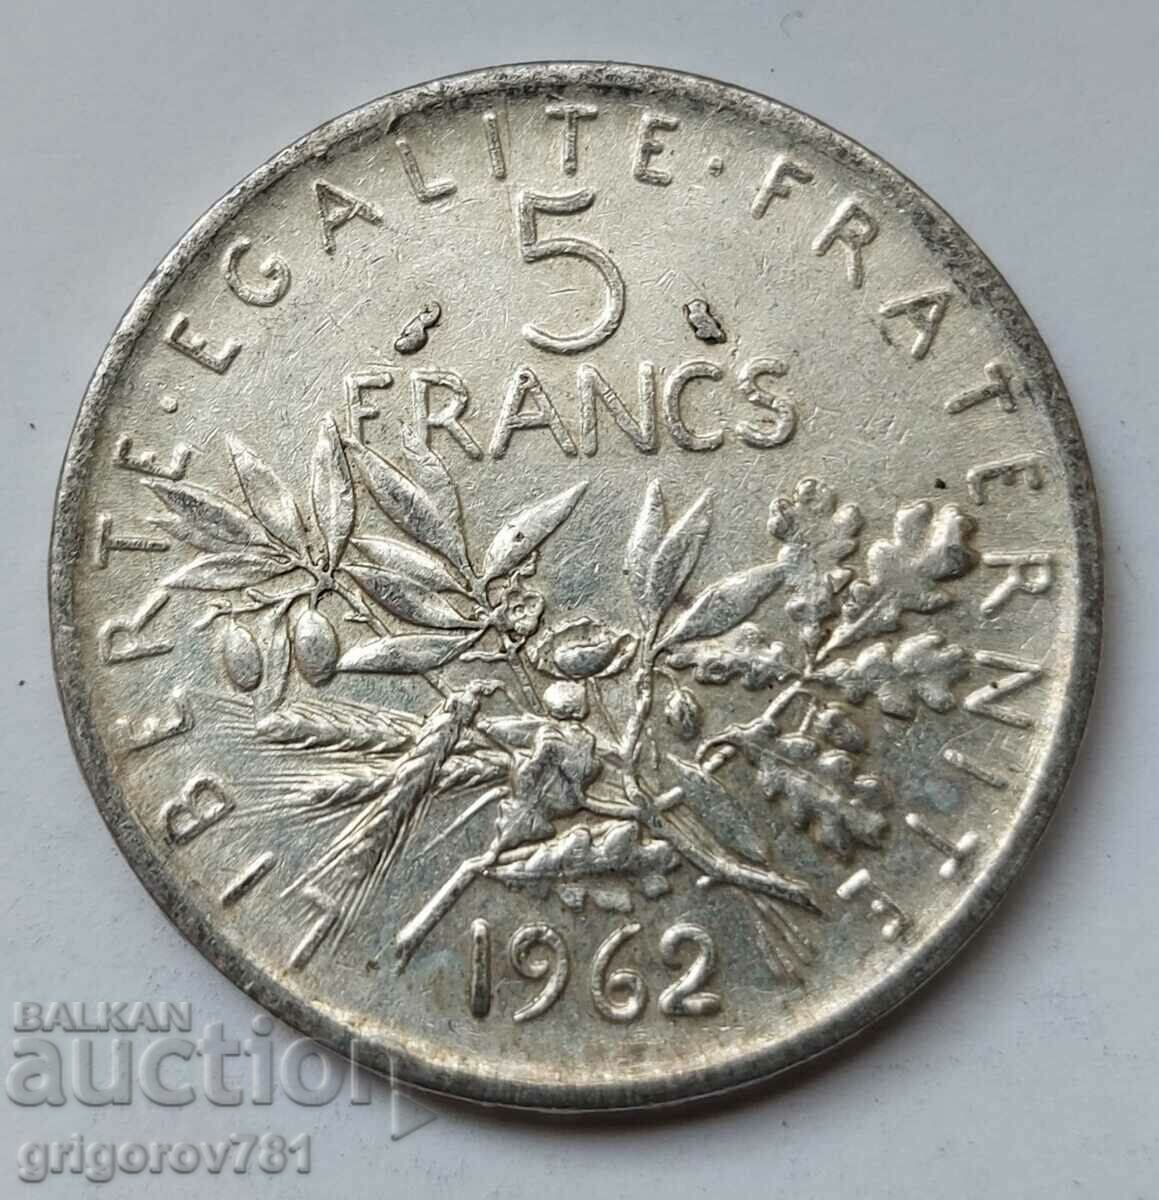 5 Francs Silver France 1962 - Silver Coin #15